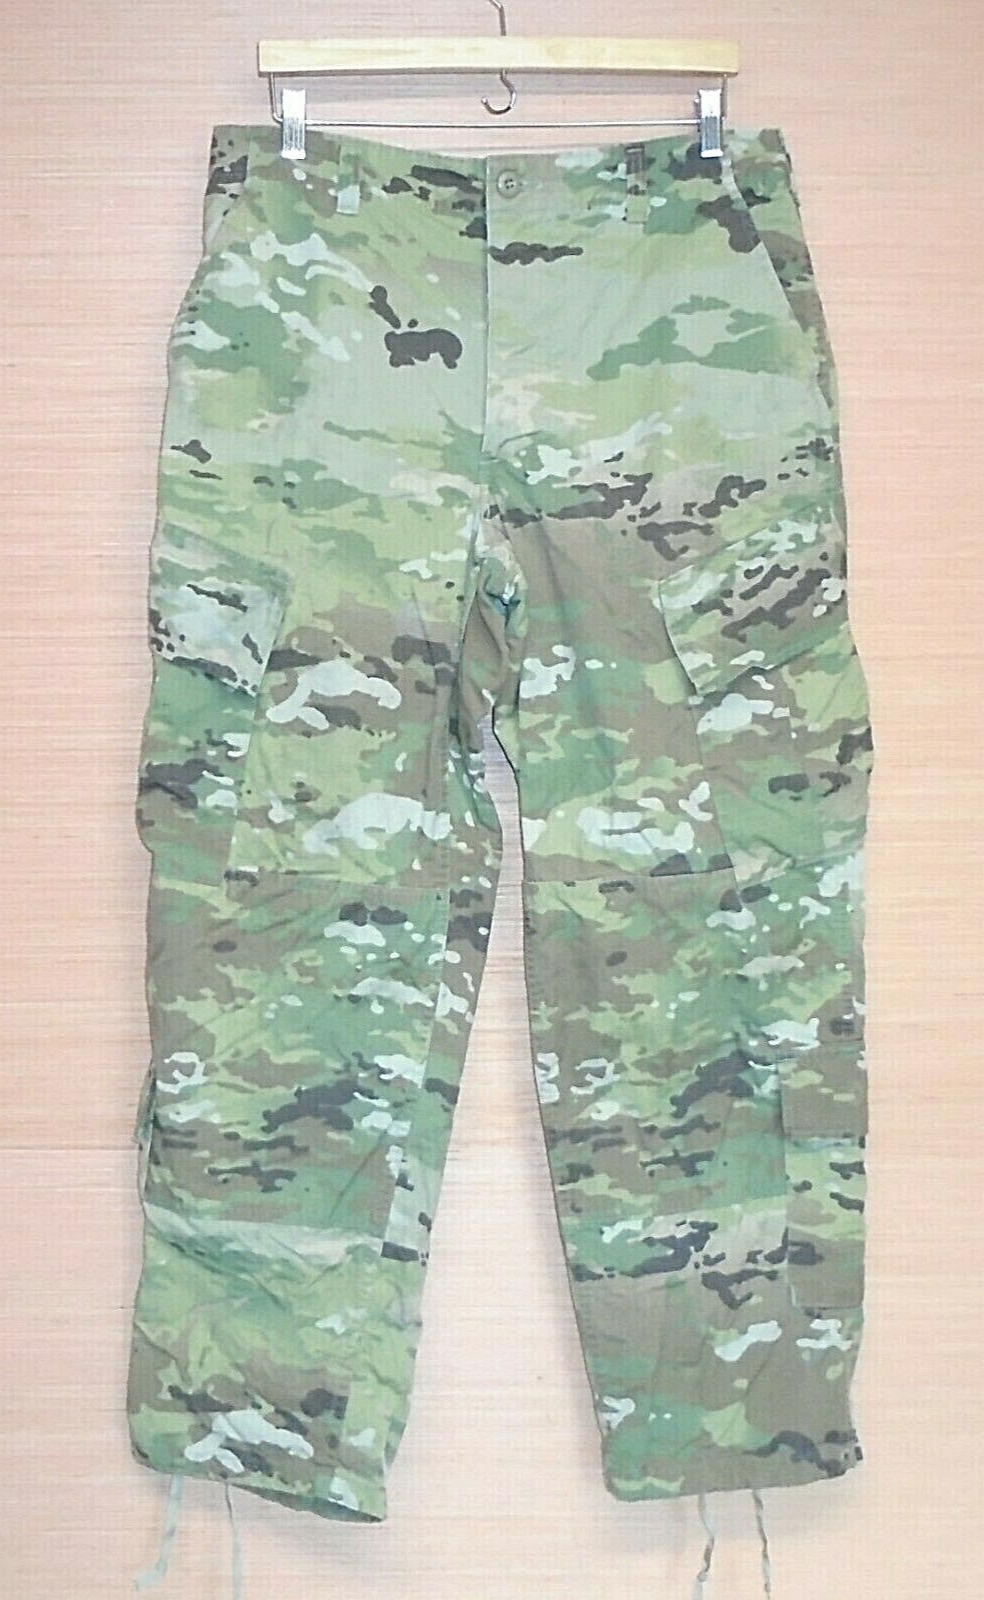 US Military Issue Unisex Army OCP Camouflage Combat Pants Trousers Medium Short